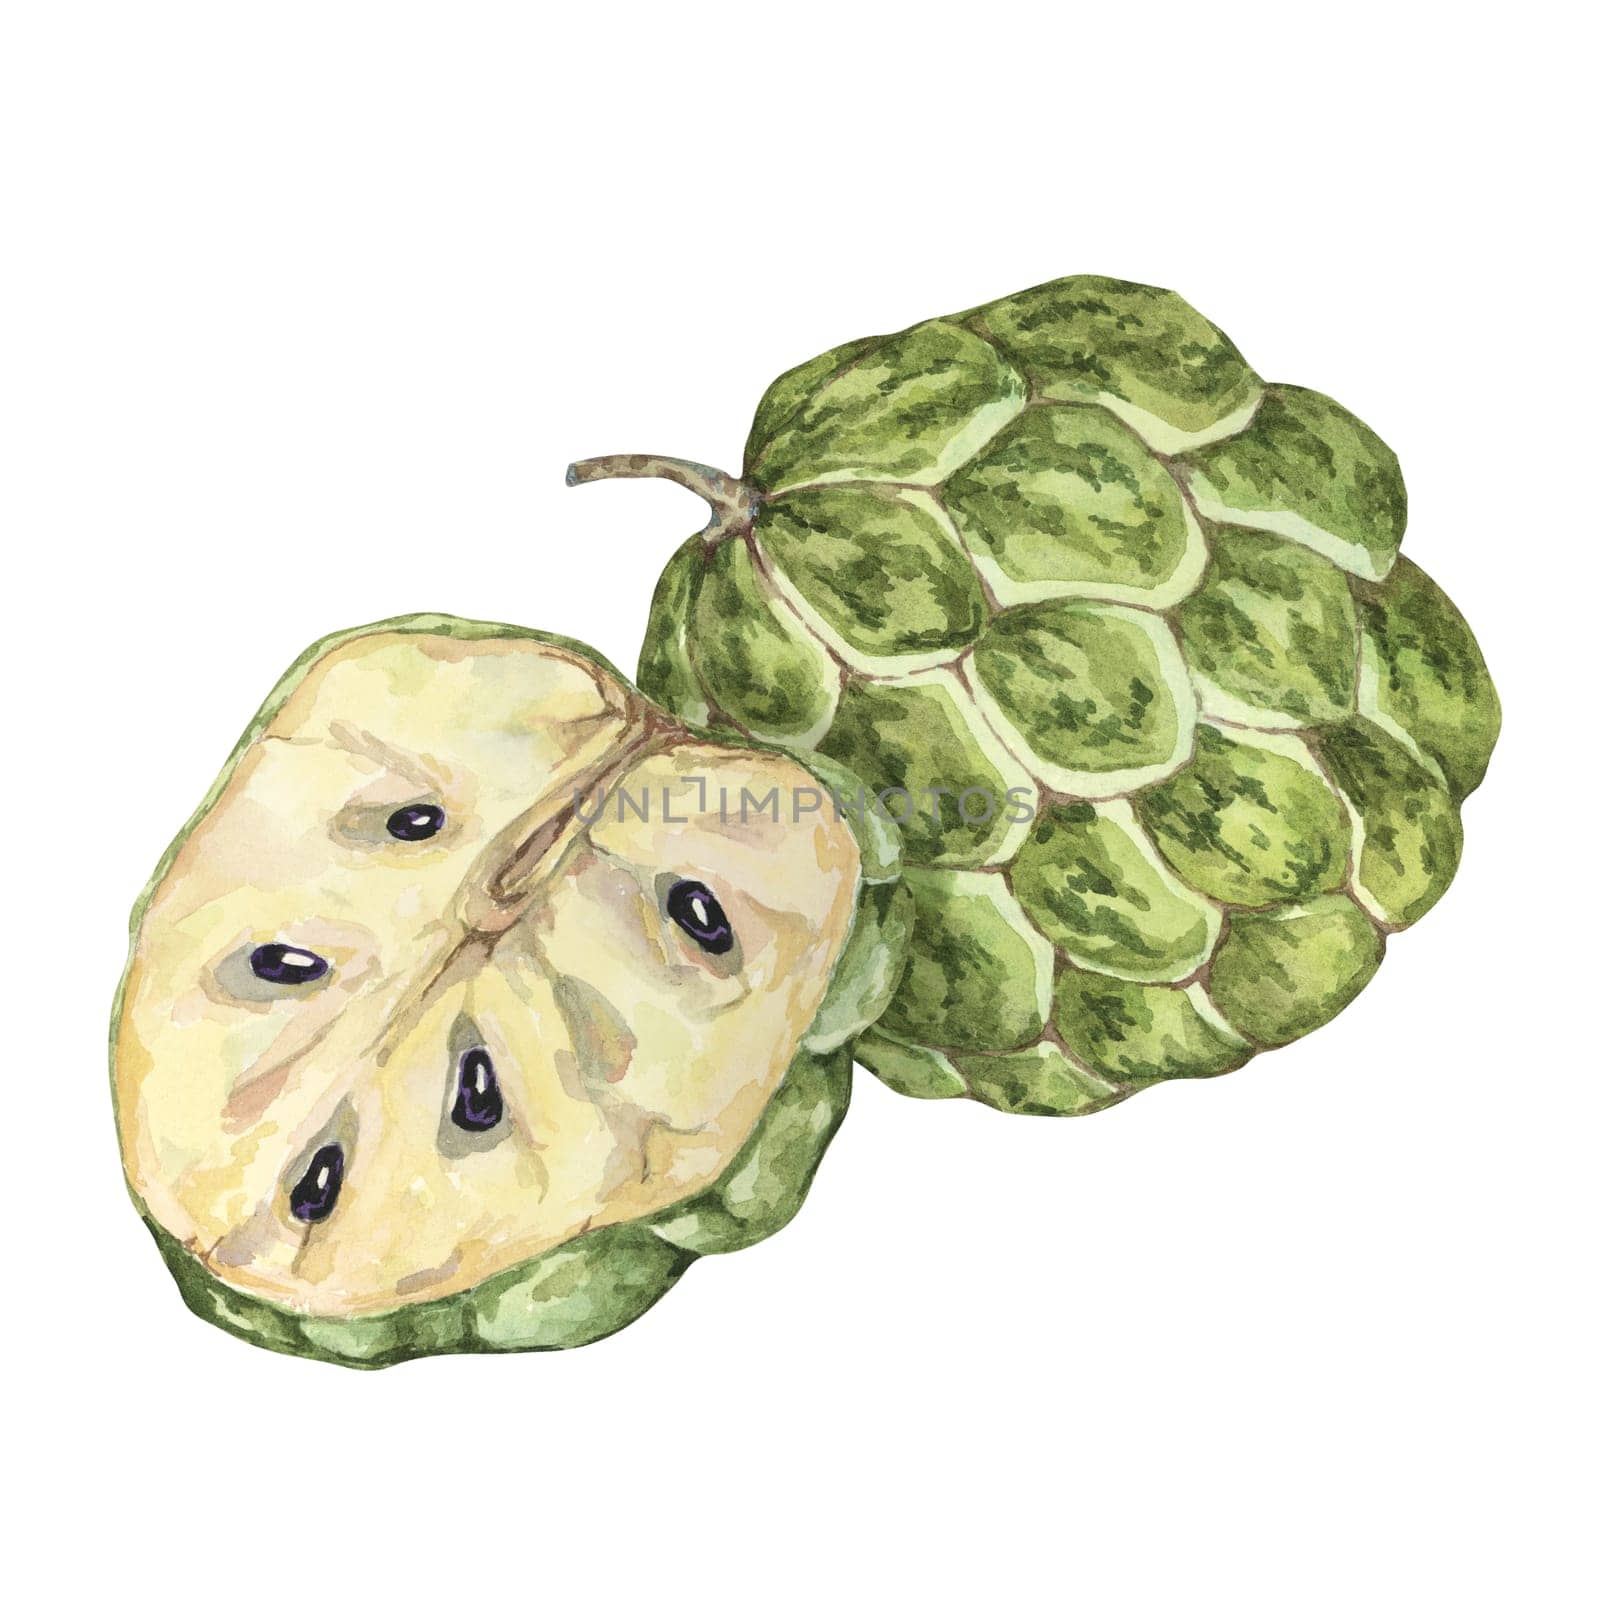 Green cherimoya exotic fruit whole and half. Hand drawn watercolor illustration of custard apple, sugar sweet apple for printing, packaging, sticker by Fofito